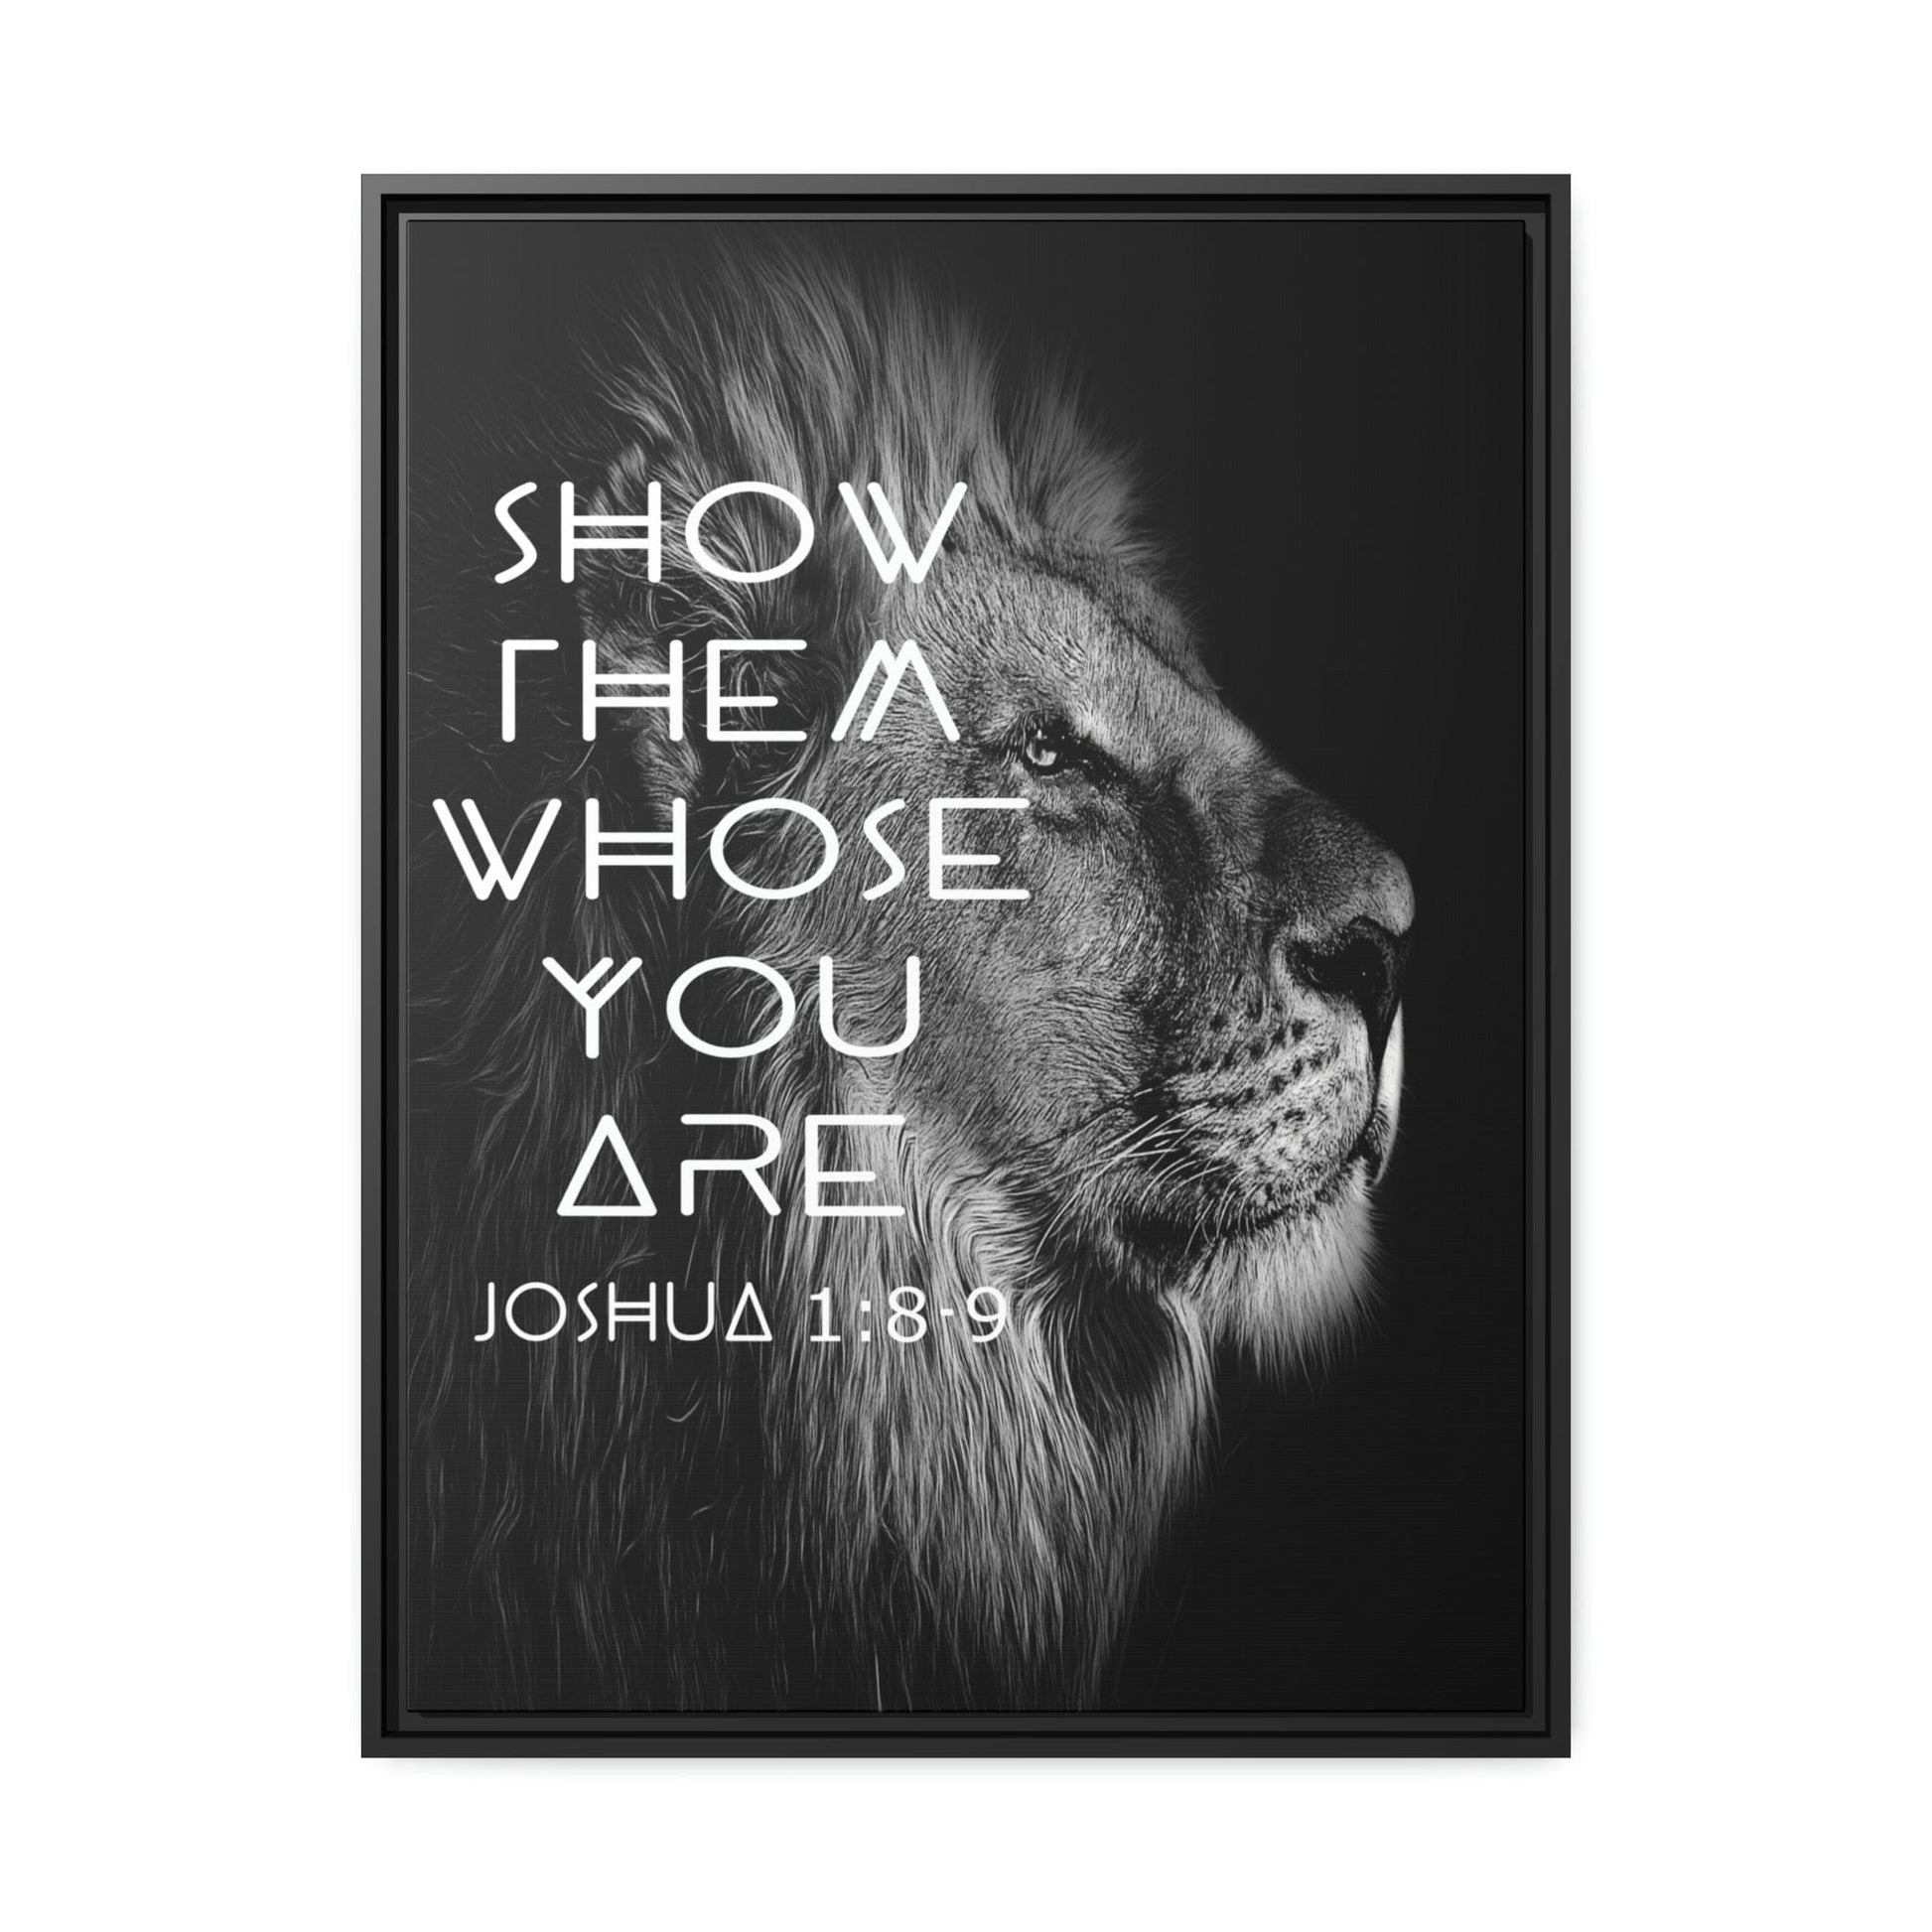 Printify Canvas 24" x 32" (Vertical) / Black / 1.25" Show Them Whose You Are - Joshua 1:8-9 Christian Canvas Wall Art